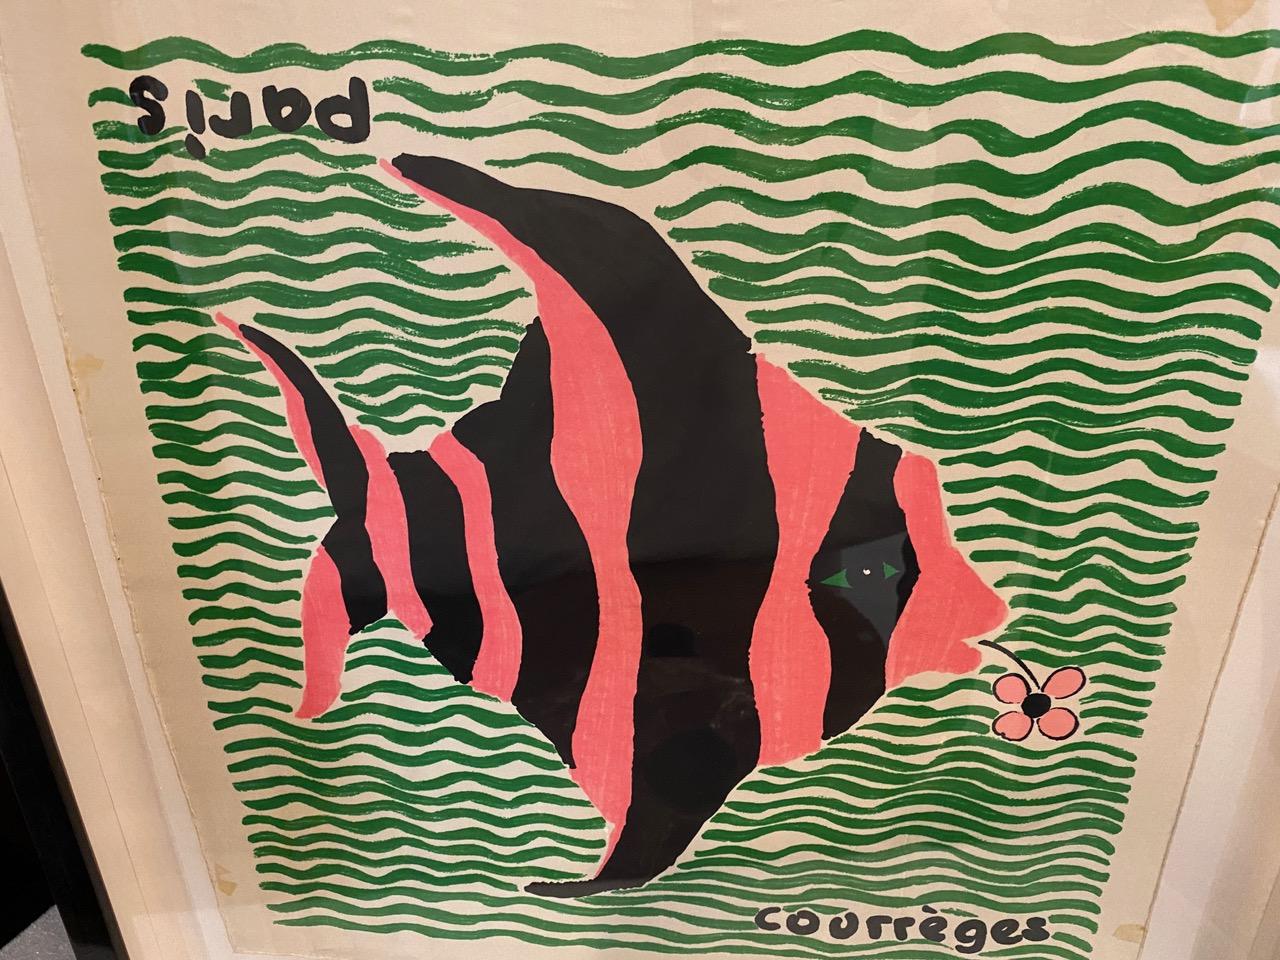 Rare, vintage Courrèges silk scarf in excellent condition from Paris, France, featuring bold contrasting colors in this stunning fish abstract design. Set in a modern black teak box frame.

Andrianna Shamaris. The Leader In Modern Organic Design.